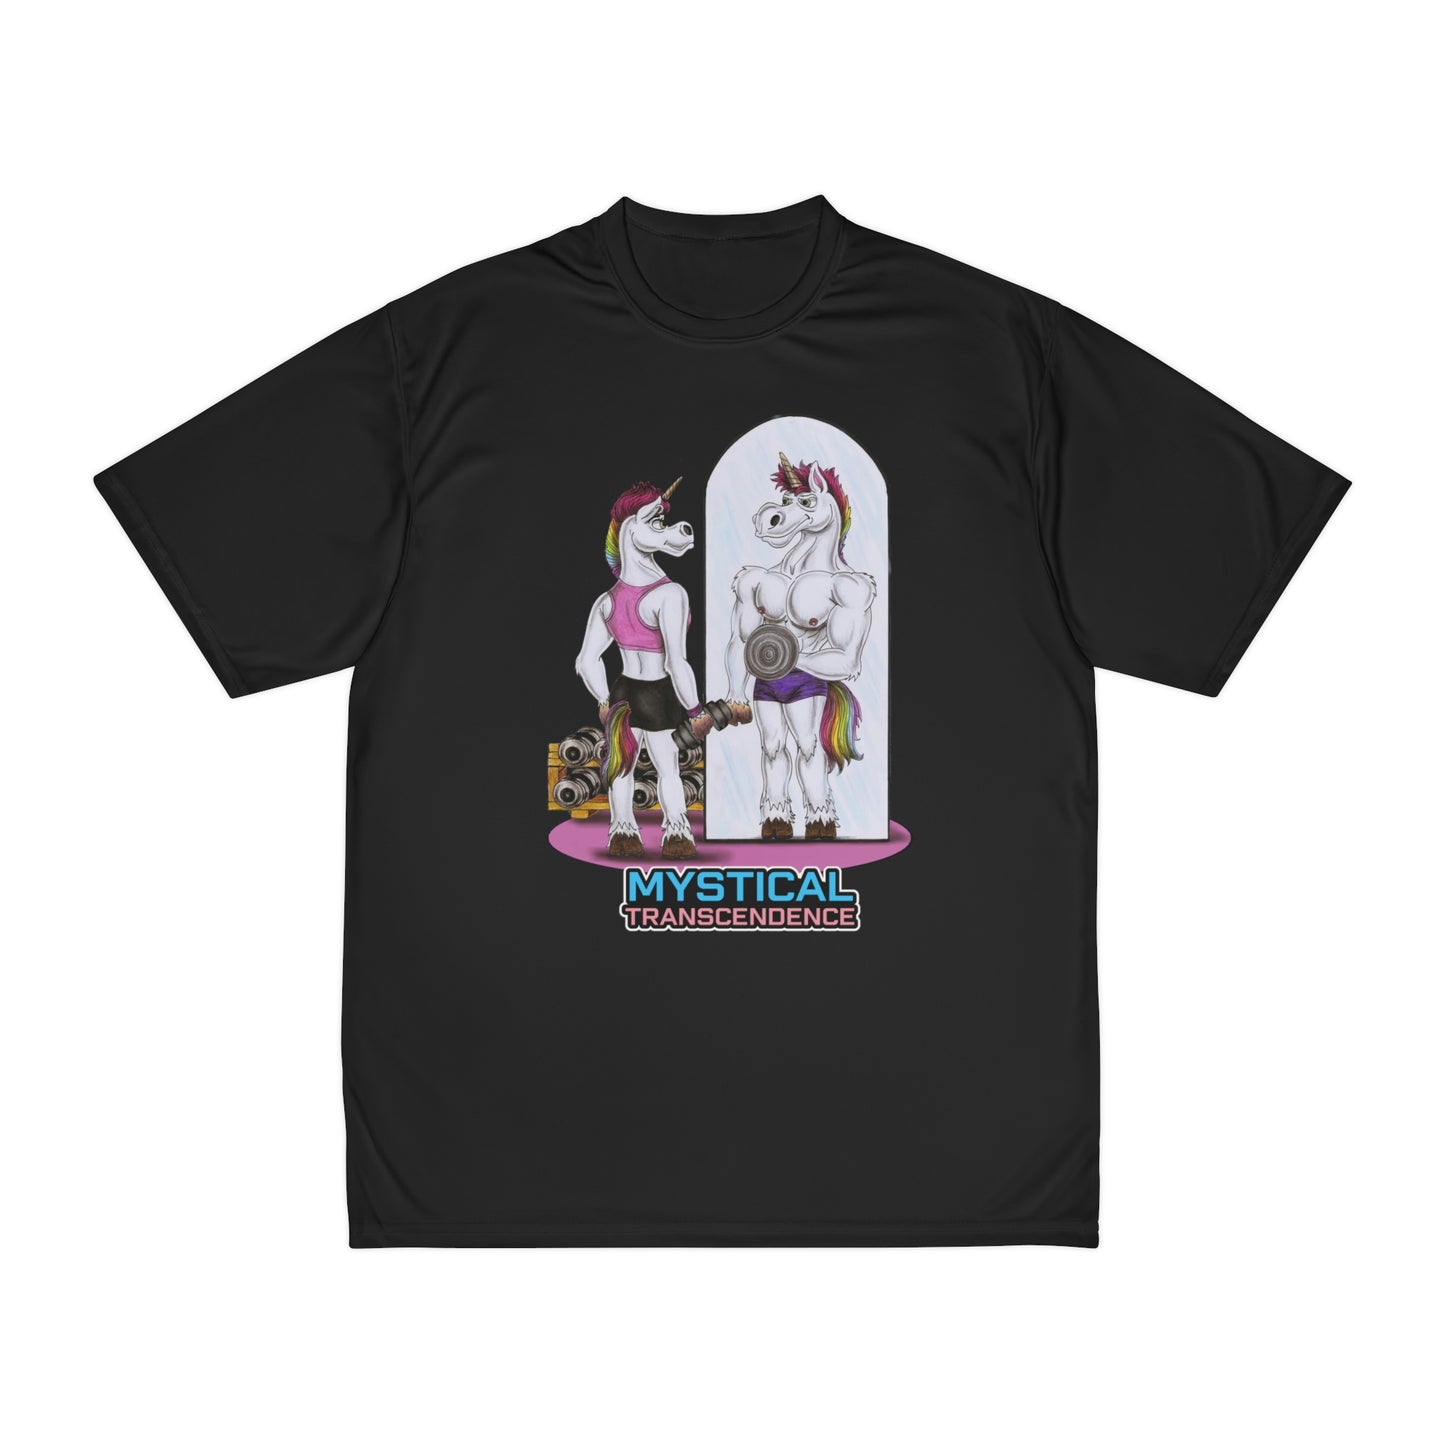 Authentic Mirror Reflection Performance T-Shirt